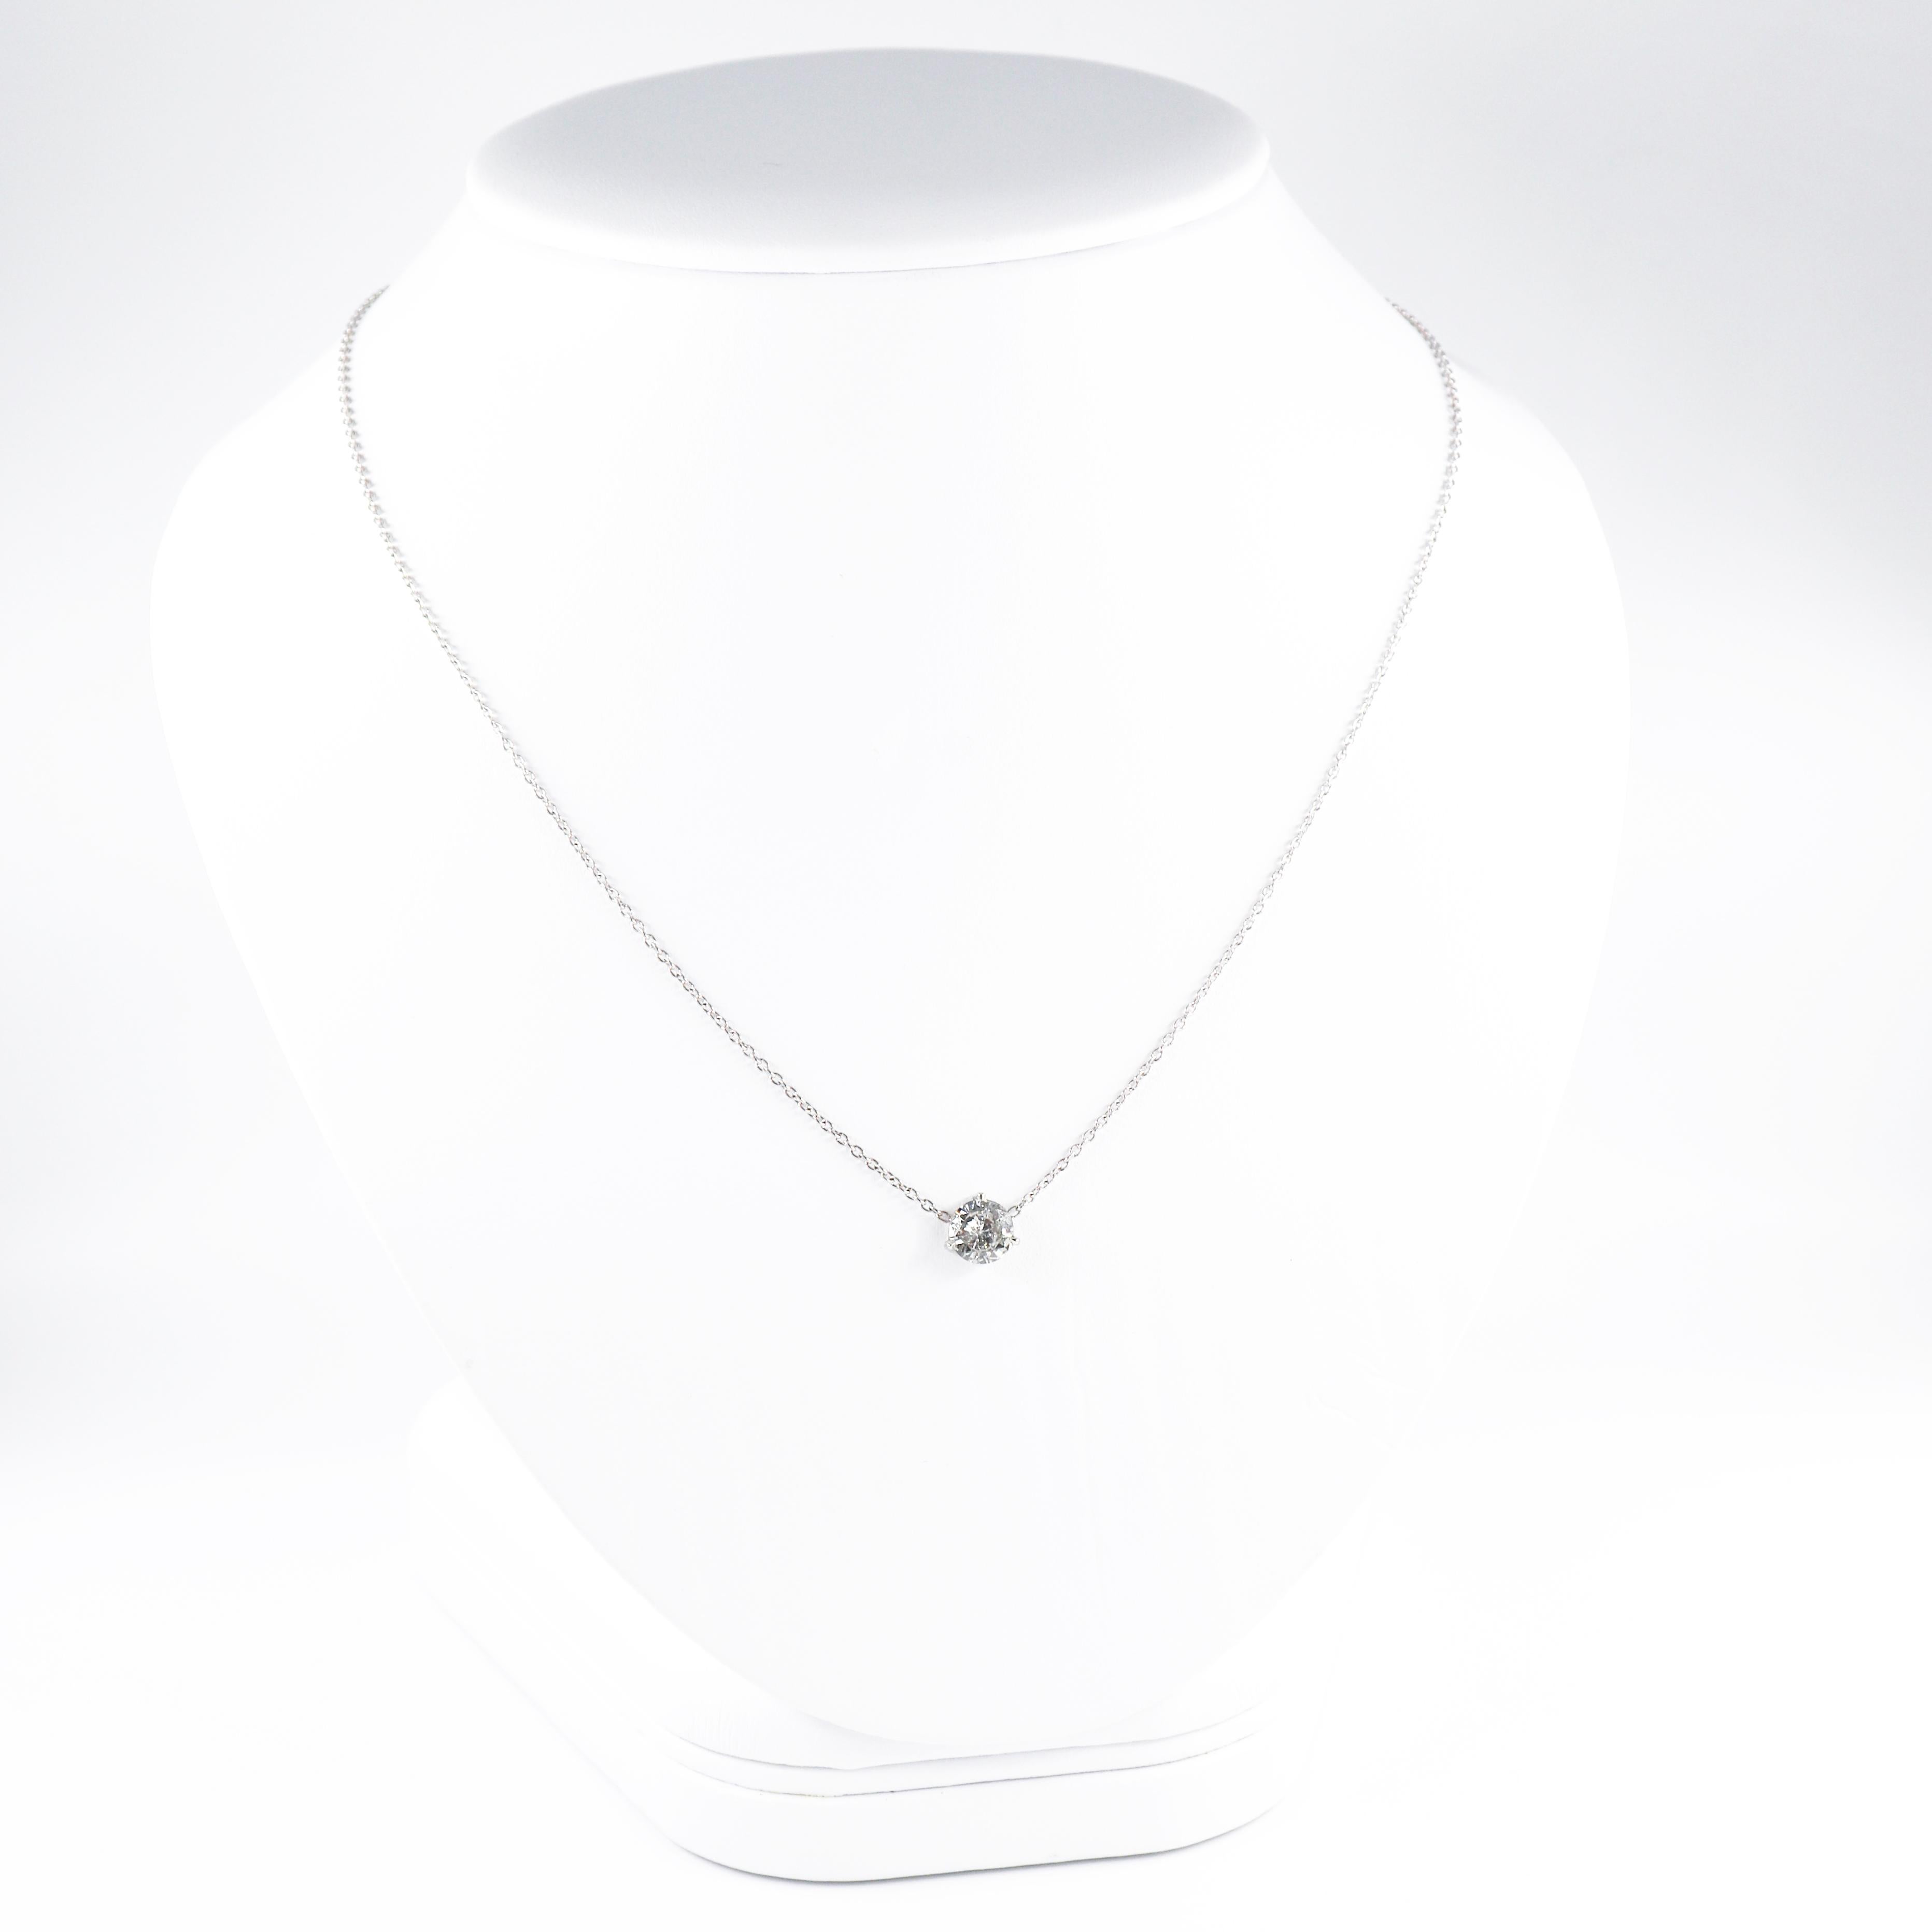 This J. Birnbach 3 prongs pendant necklace, crafted in platinum, features a 1.04-carat round brilliant diamond with I color and I2 clarity. 

This necklace is 18 inches and stamped 'PT950'

Type: 3 prongs pendant necklace
Creator: J.